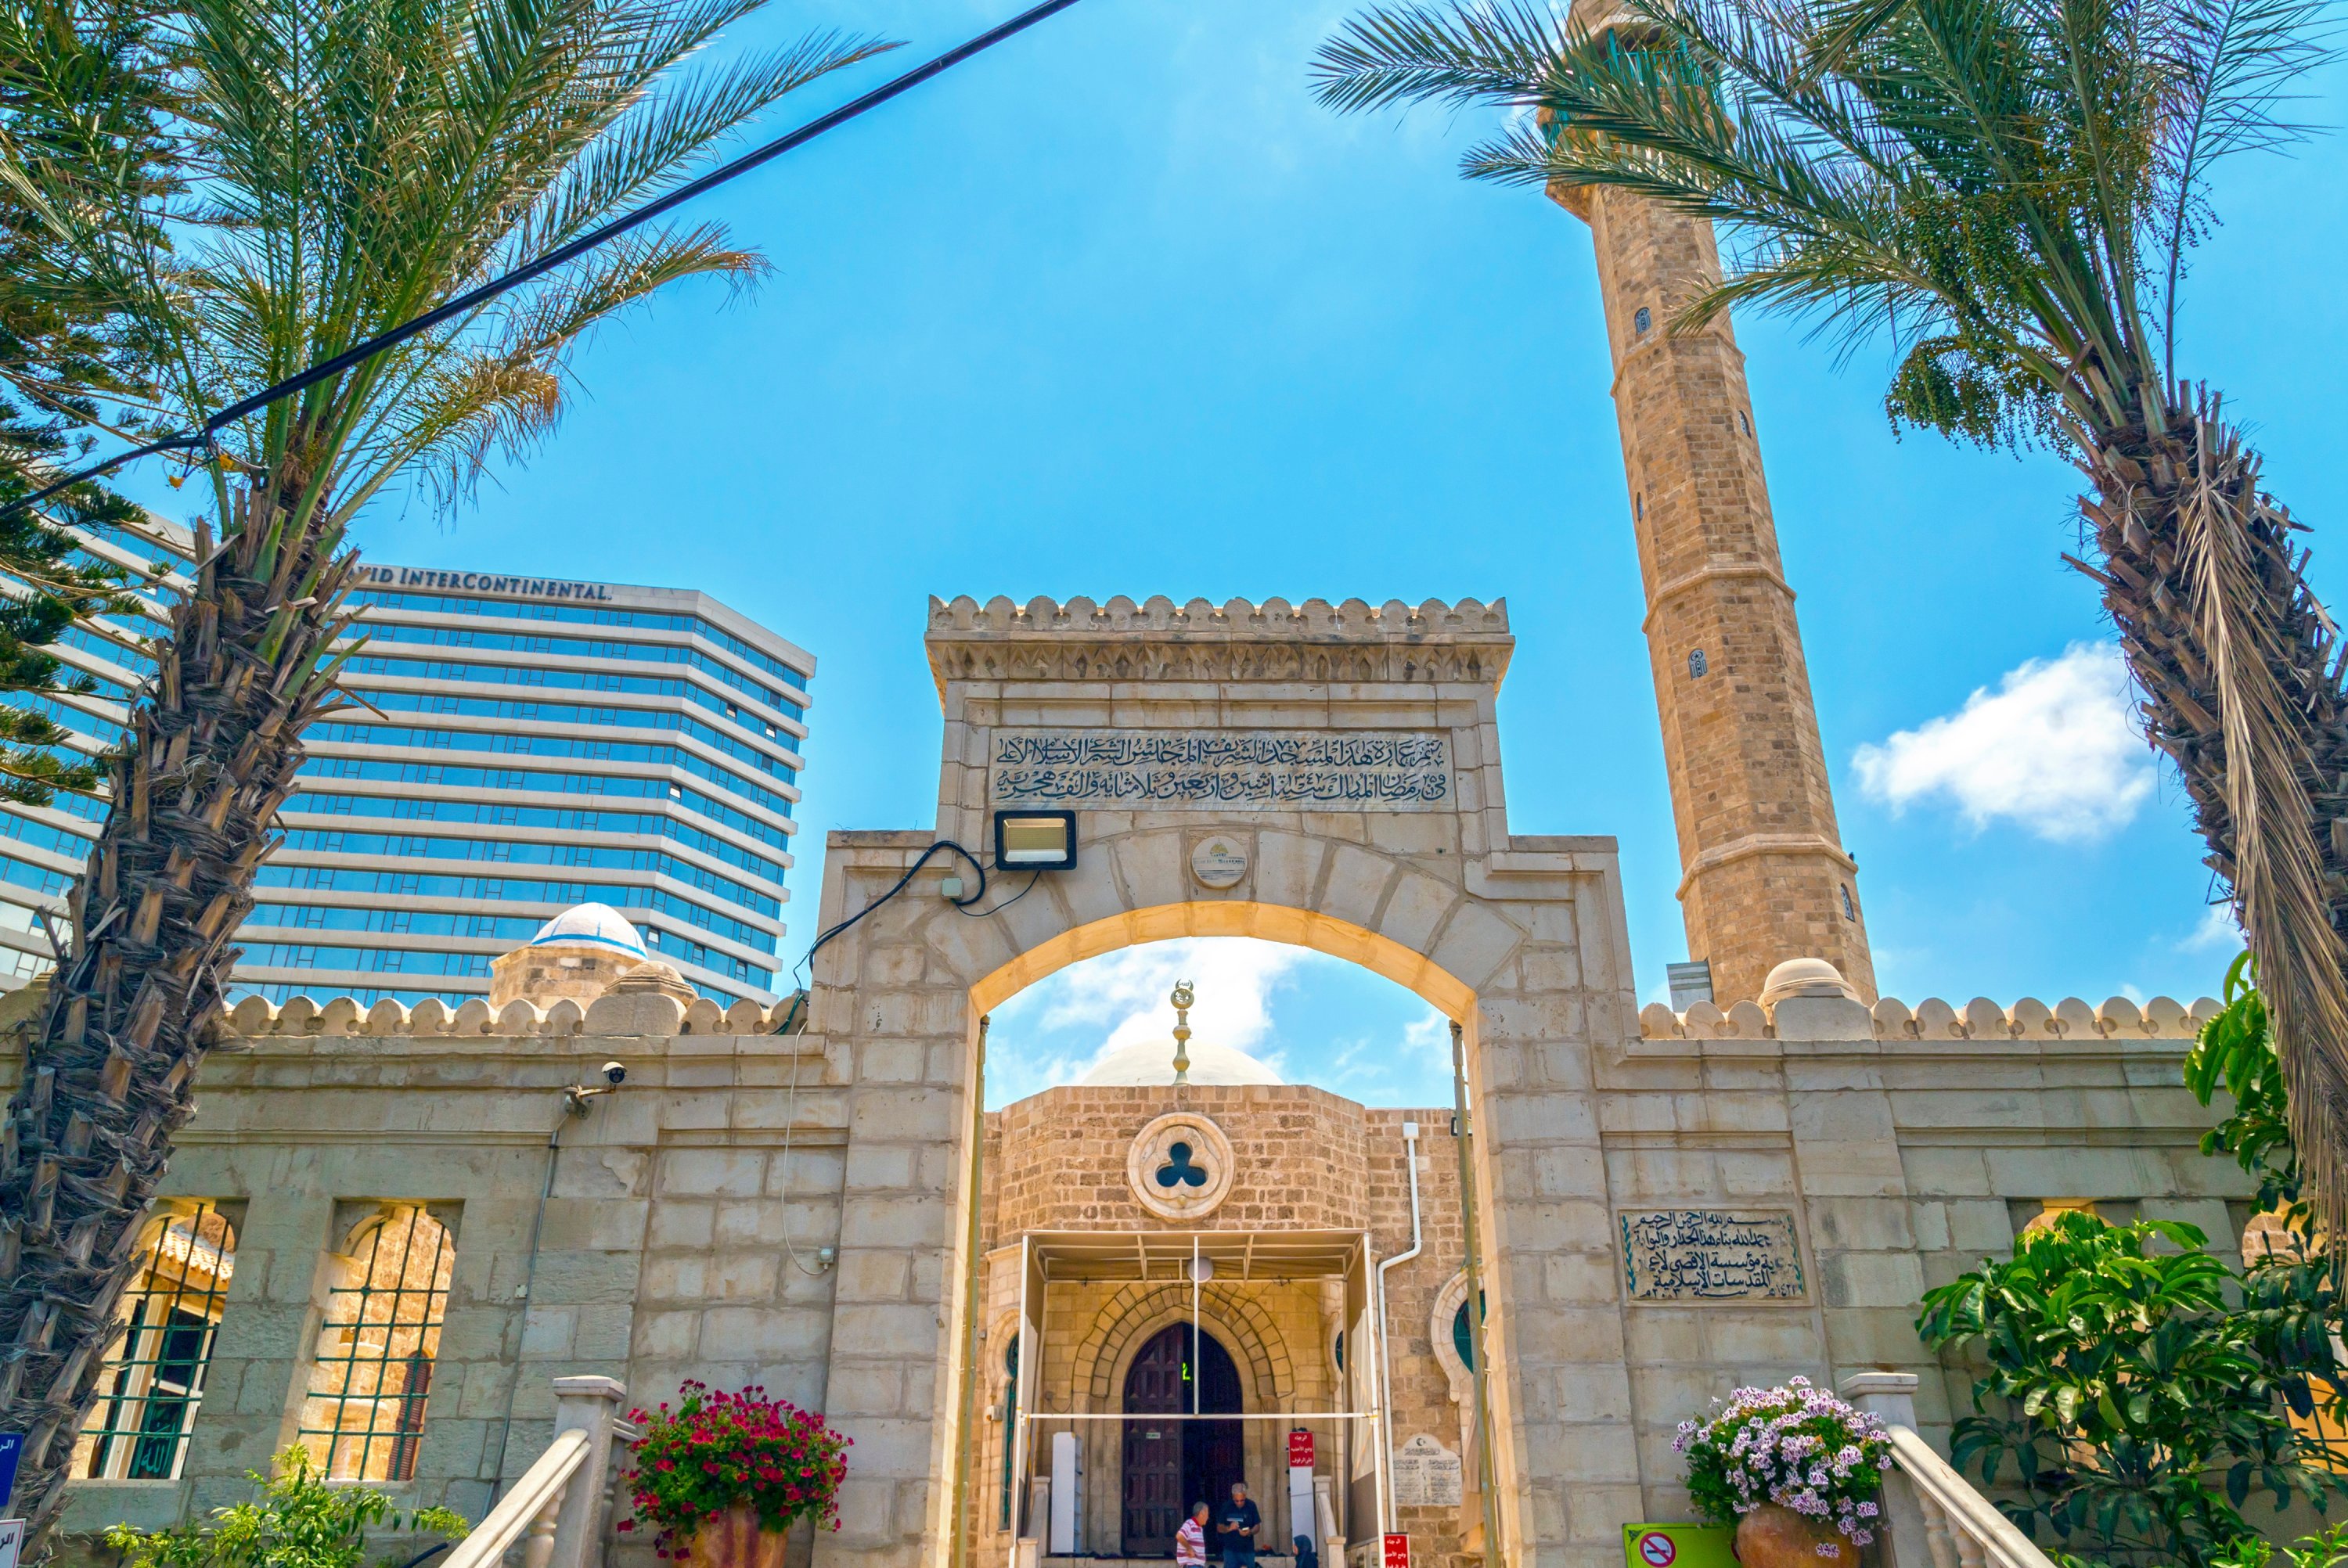 A view of the gate of the Hassan Beck Mosque, Tel Aviv, Israel, June 6, 2018. (Shoterstock photo)